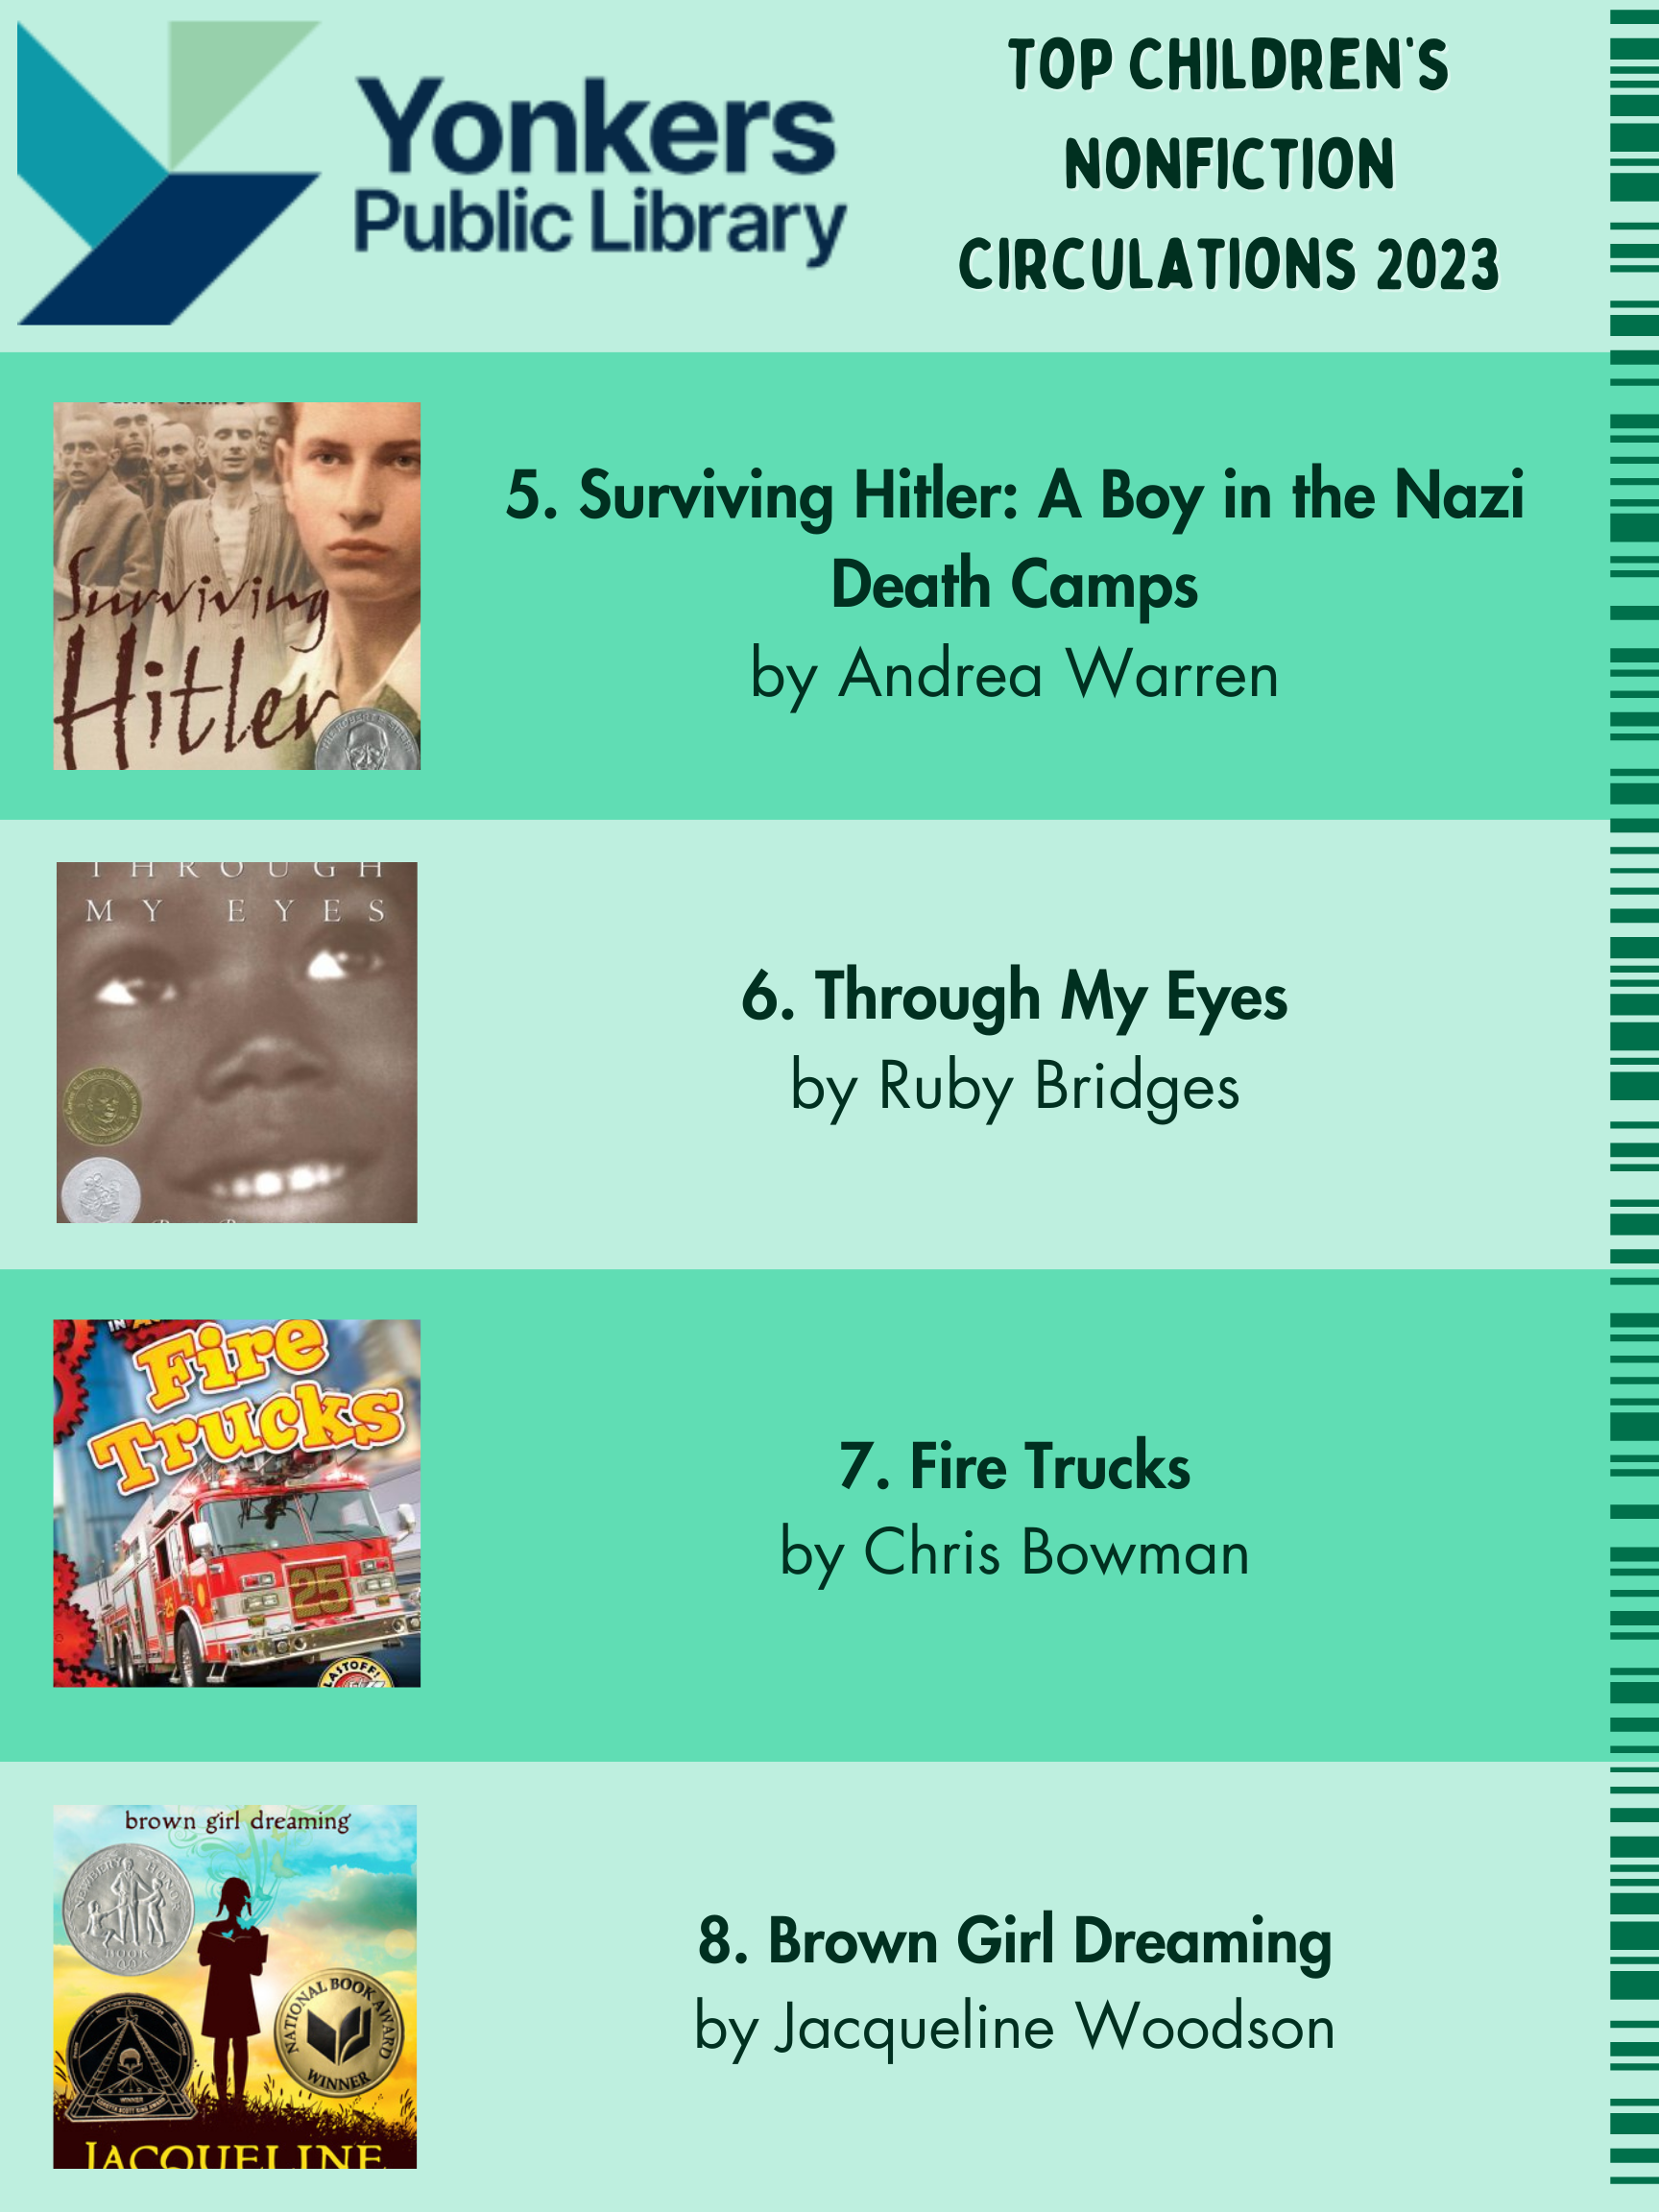 Top Children's NonFiction Circulations 2023. Suviving Hitler, Through My Eyes, Fire Trucks and Brown Girl Dreaming.